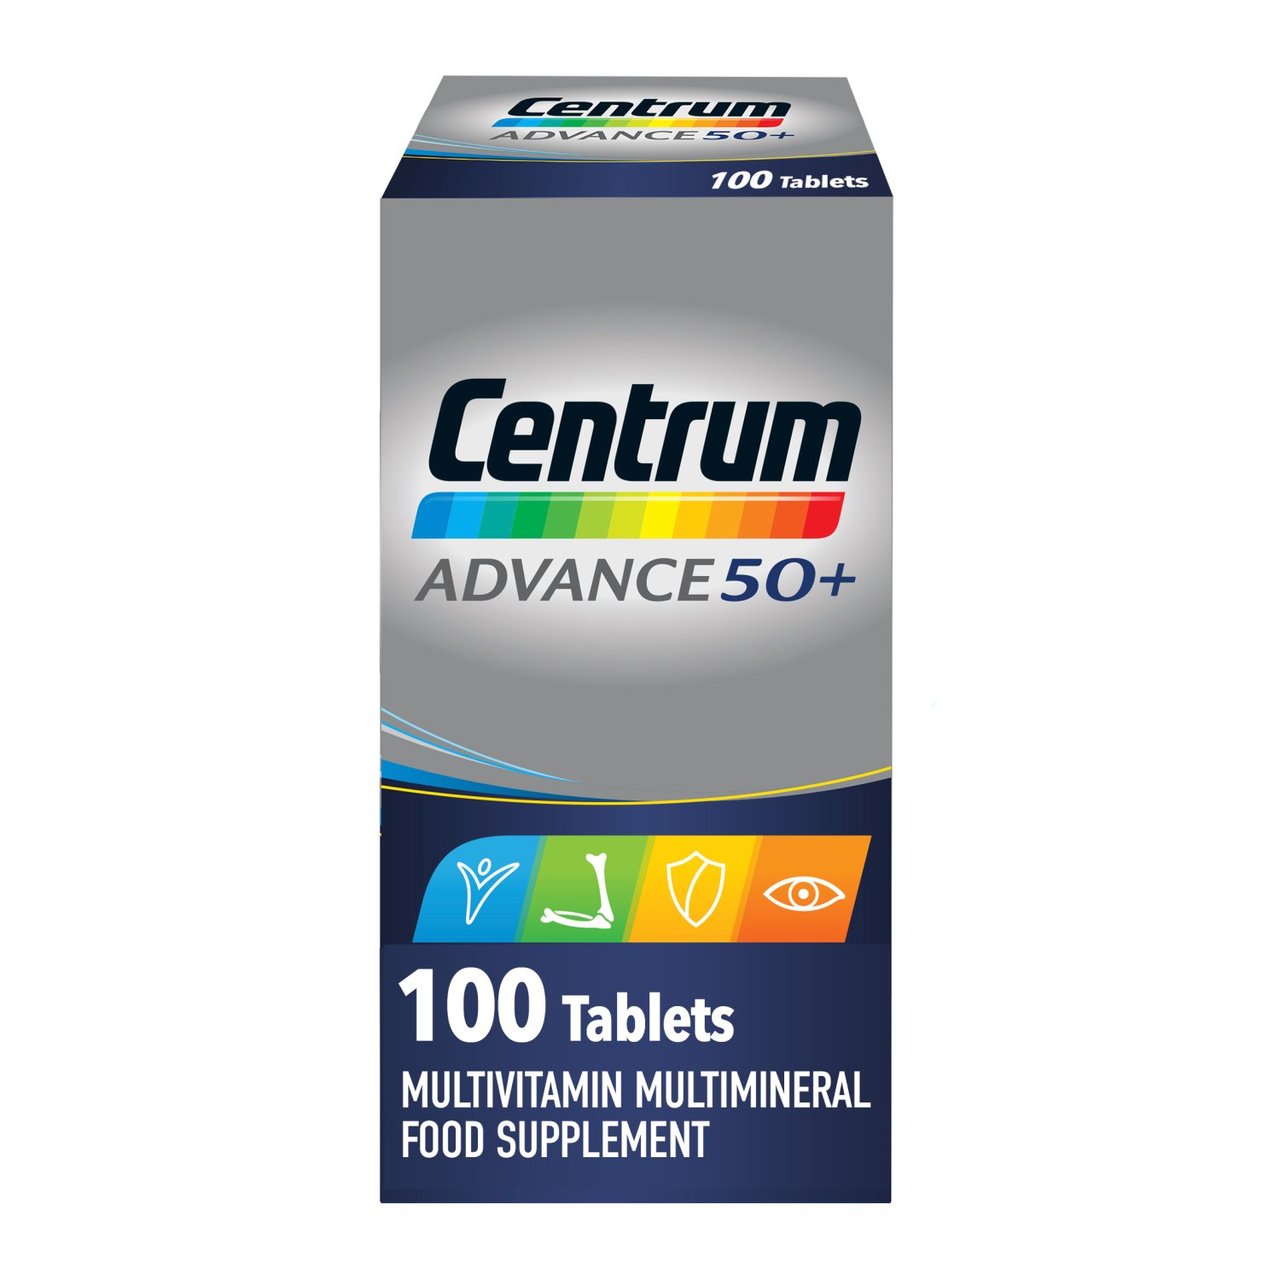 Centrum Advance 50+ Multivitamin Supplement Tablets 100 Pack RRP £12.50 CLEARANCE XL £9.99